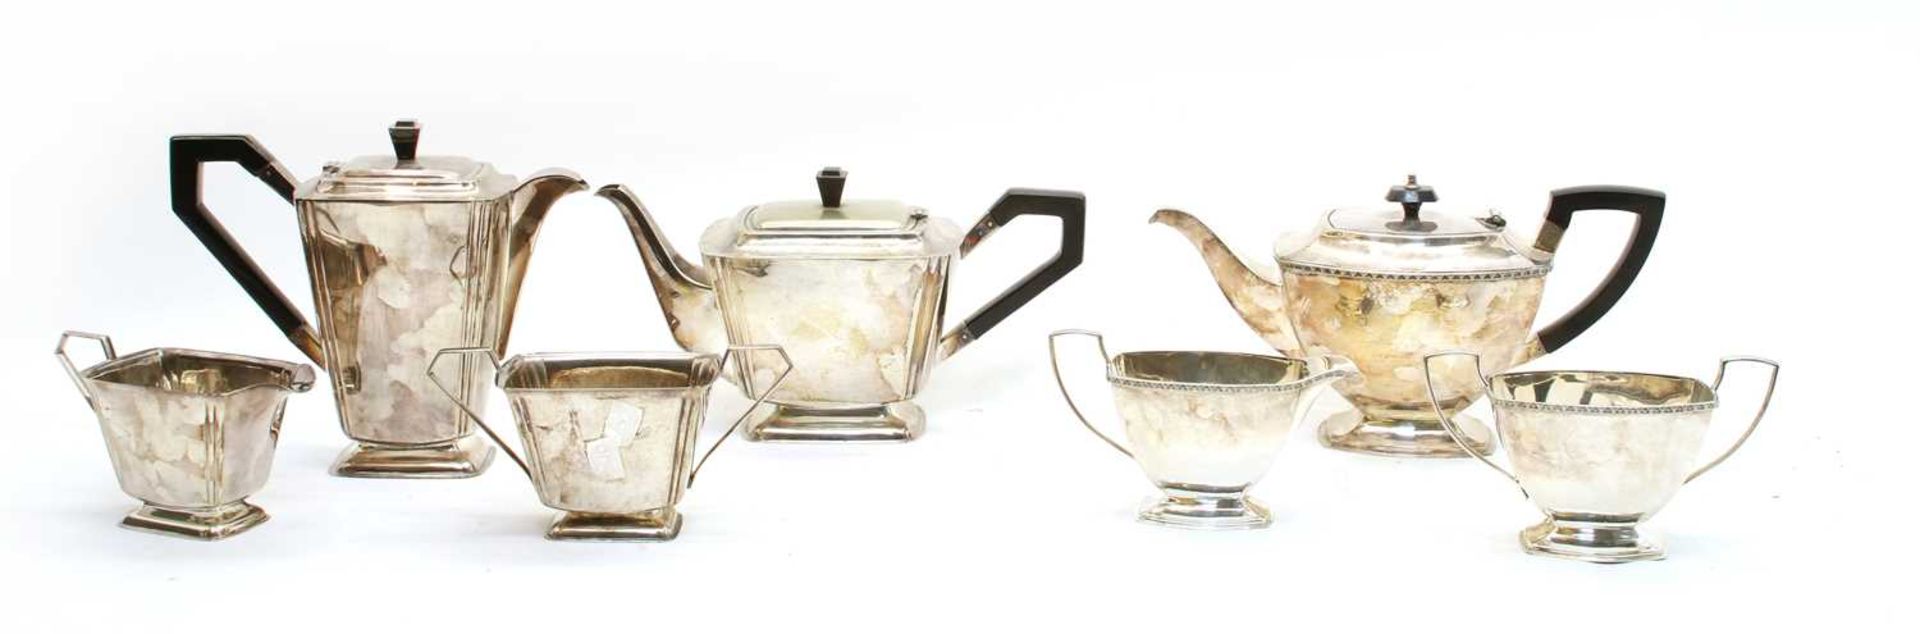 Two silver plated tea services